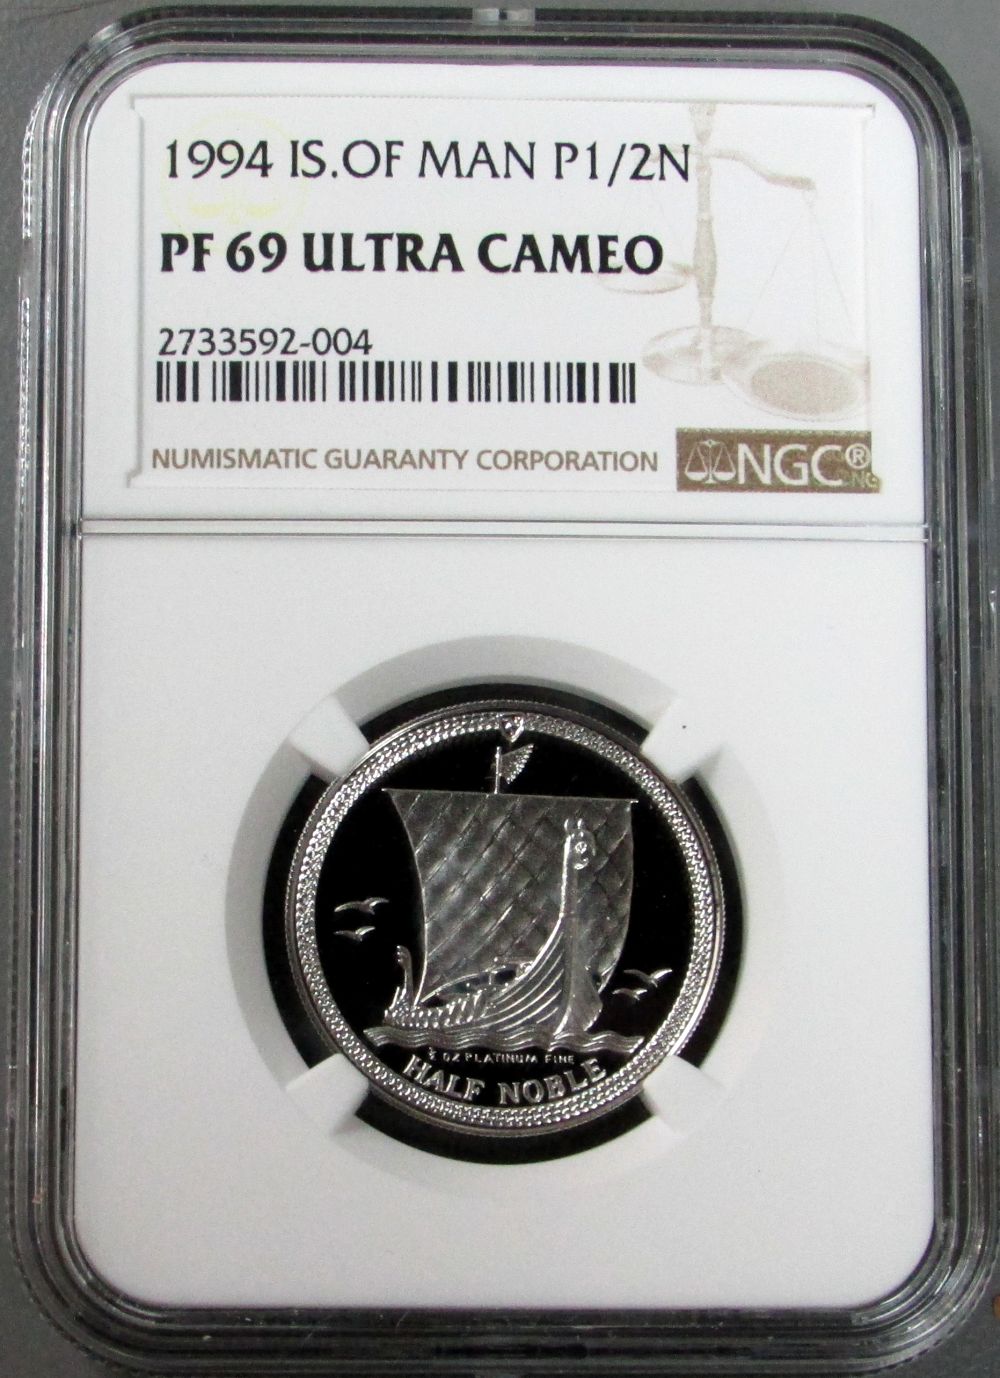 1994 PLATINUM ISLE OF MAN 1/2 NOBLE NGC PROOF 69 ULTRA CAMEO "VIKING SHIP" 10th YEAR ANNIVERSARY ONLY 250 MINTED